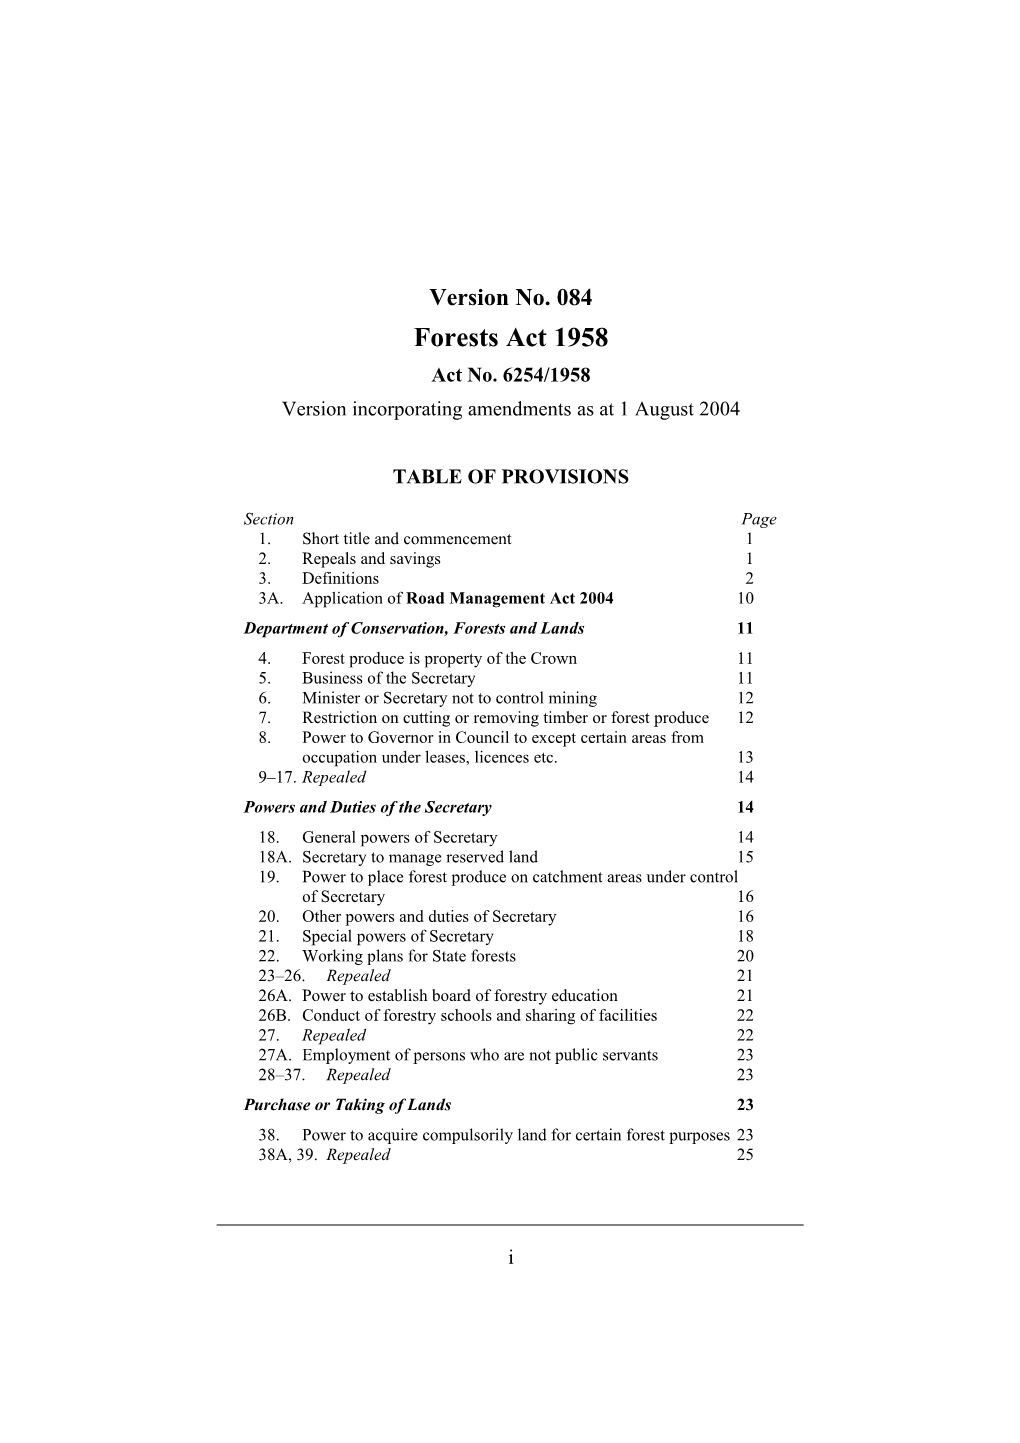 Version Incorporating Amendments As at 1 August 2004